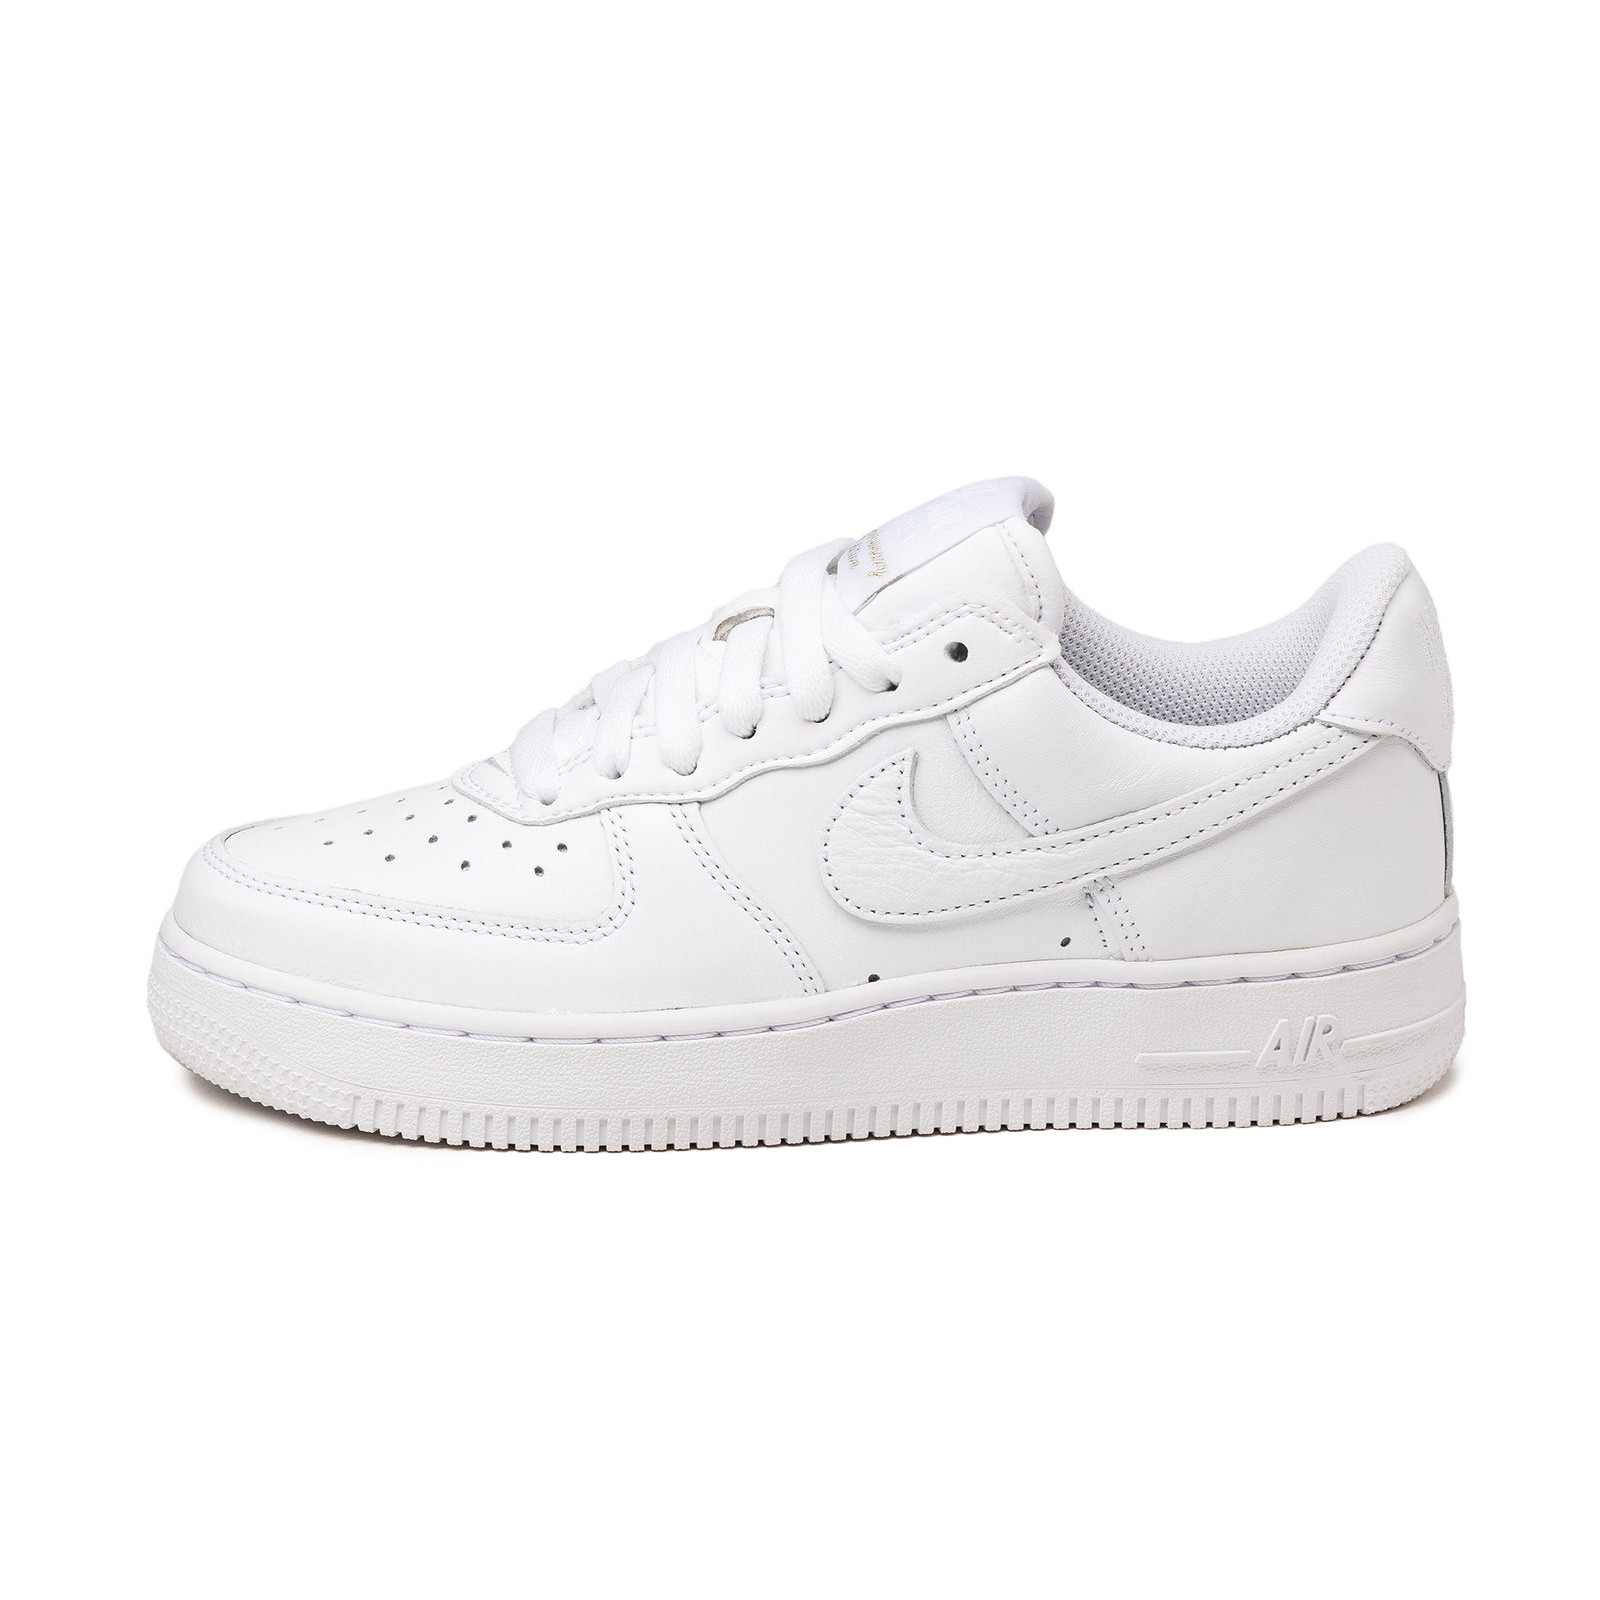 Nike Air Force 1 Low Retro
« Color of the Month »